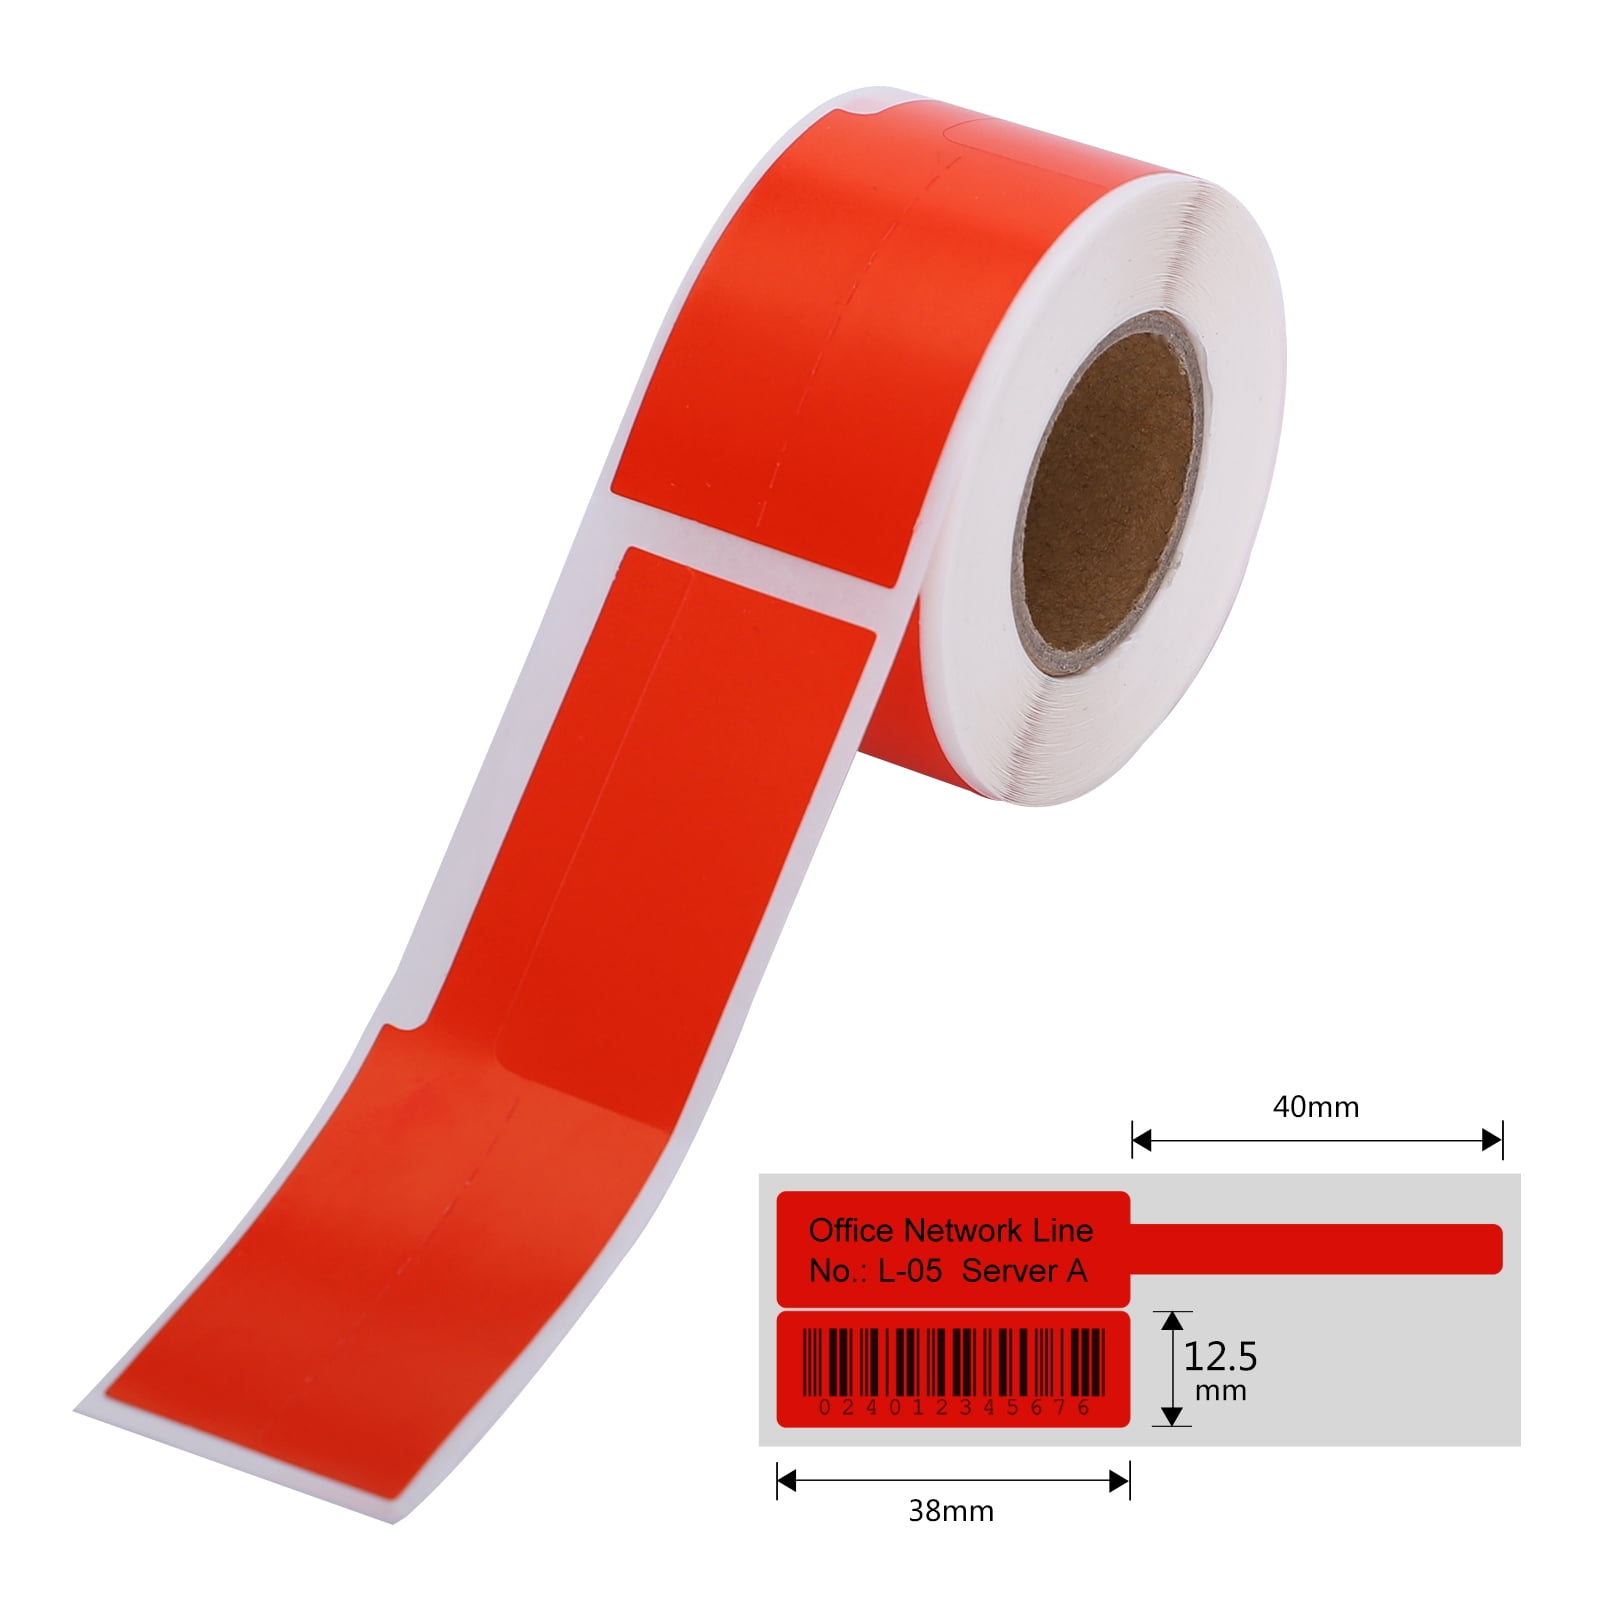 1,000 Red Print on White. 50mm x 25mm '1st CLASS MAIL' Labels / Stickers 